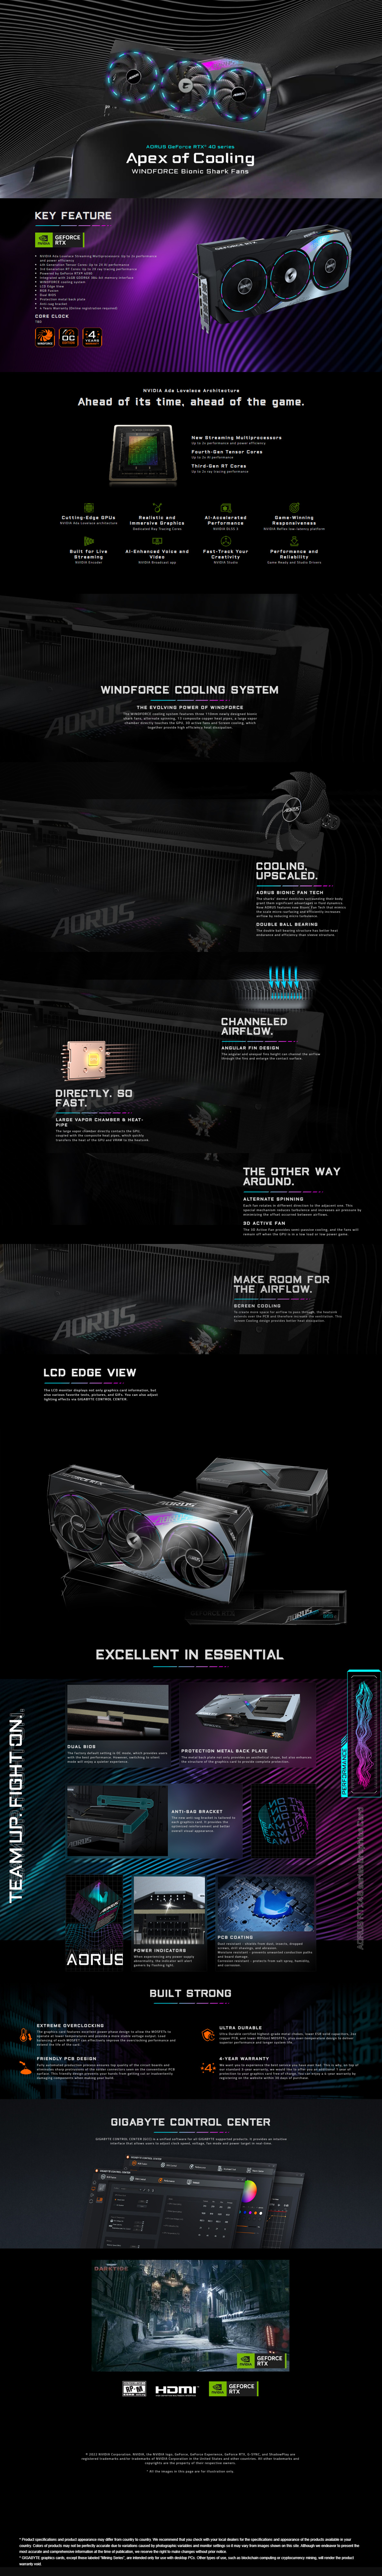 A large marketing image providing additional information about the product Gigabyte GeForce RTX 4090 Aorus Master 24GB GDDR6X - Additional alt info not provided